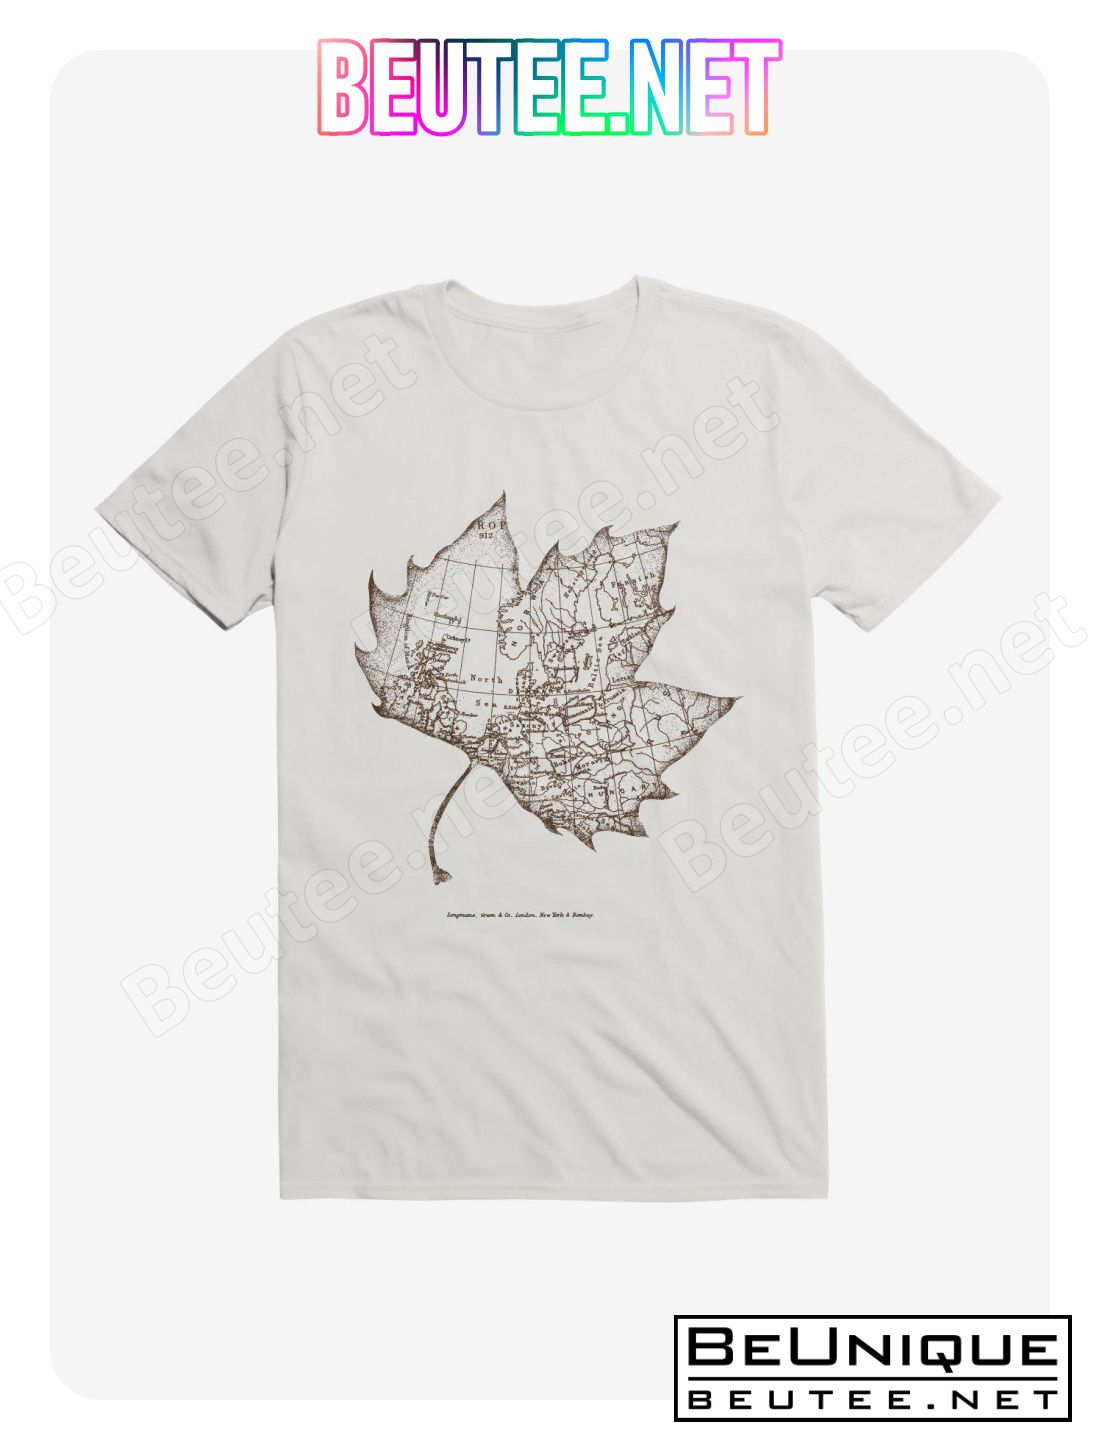 Travel With The Wind T-Shirt